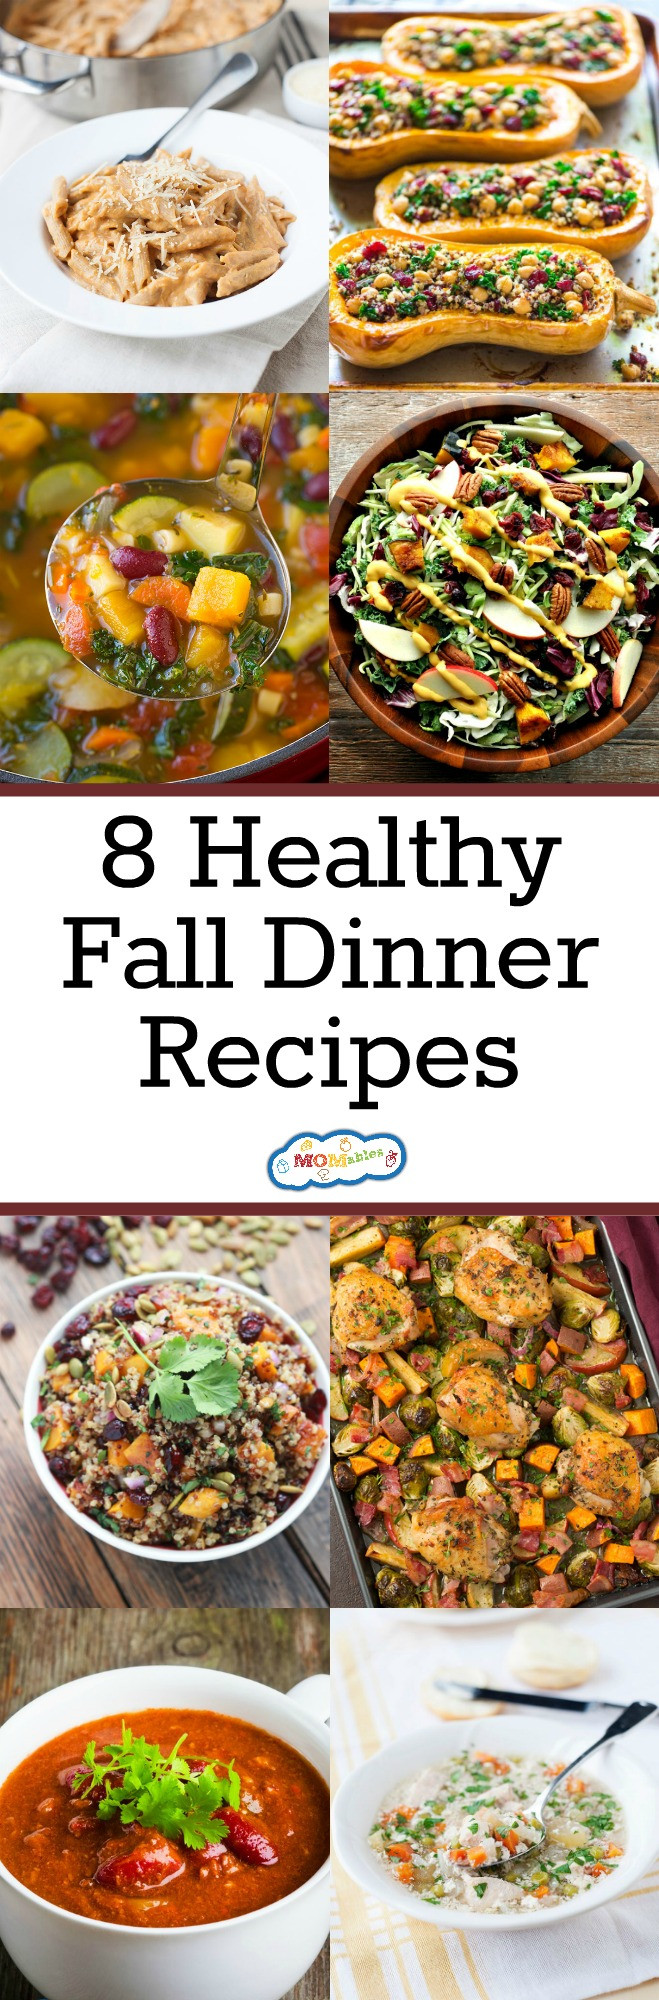 Fall Dinner Recipes
 8 Healthy Fall Dinner Recipes MOMables Good Food